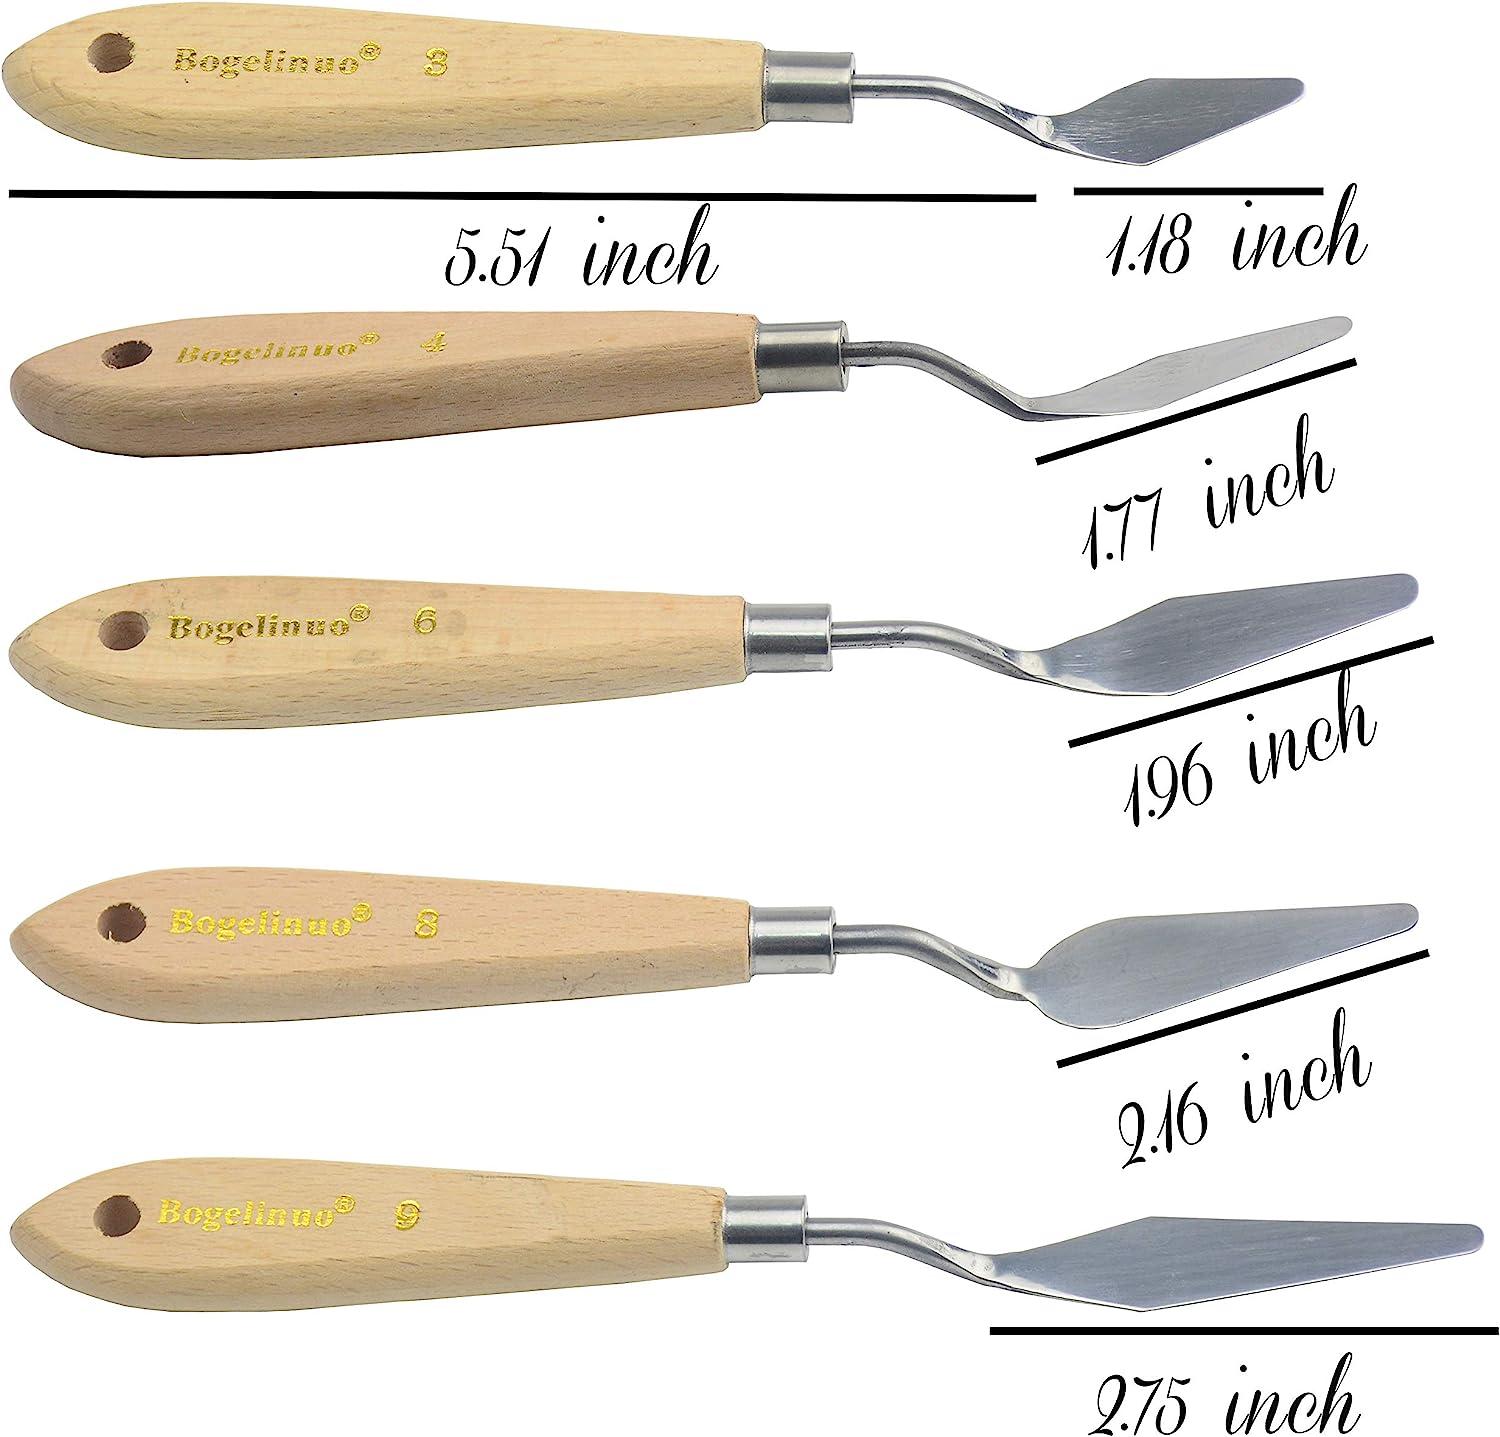 AebDerp 9 pcs Palette Knives Oil Painting Scraper Shovel Paint Spatula Knife  with Wooden Handle for Oil, Canvas, Acrylic Painting Tool Set